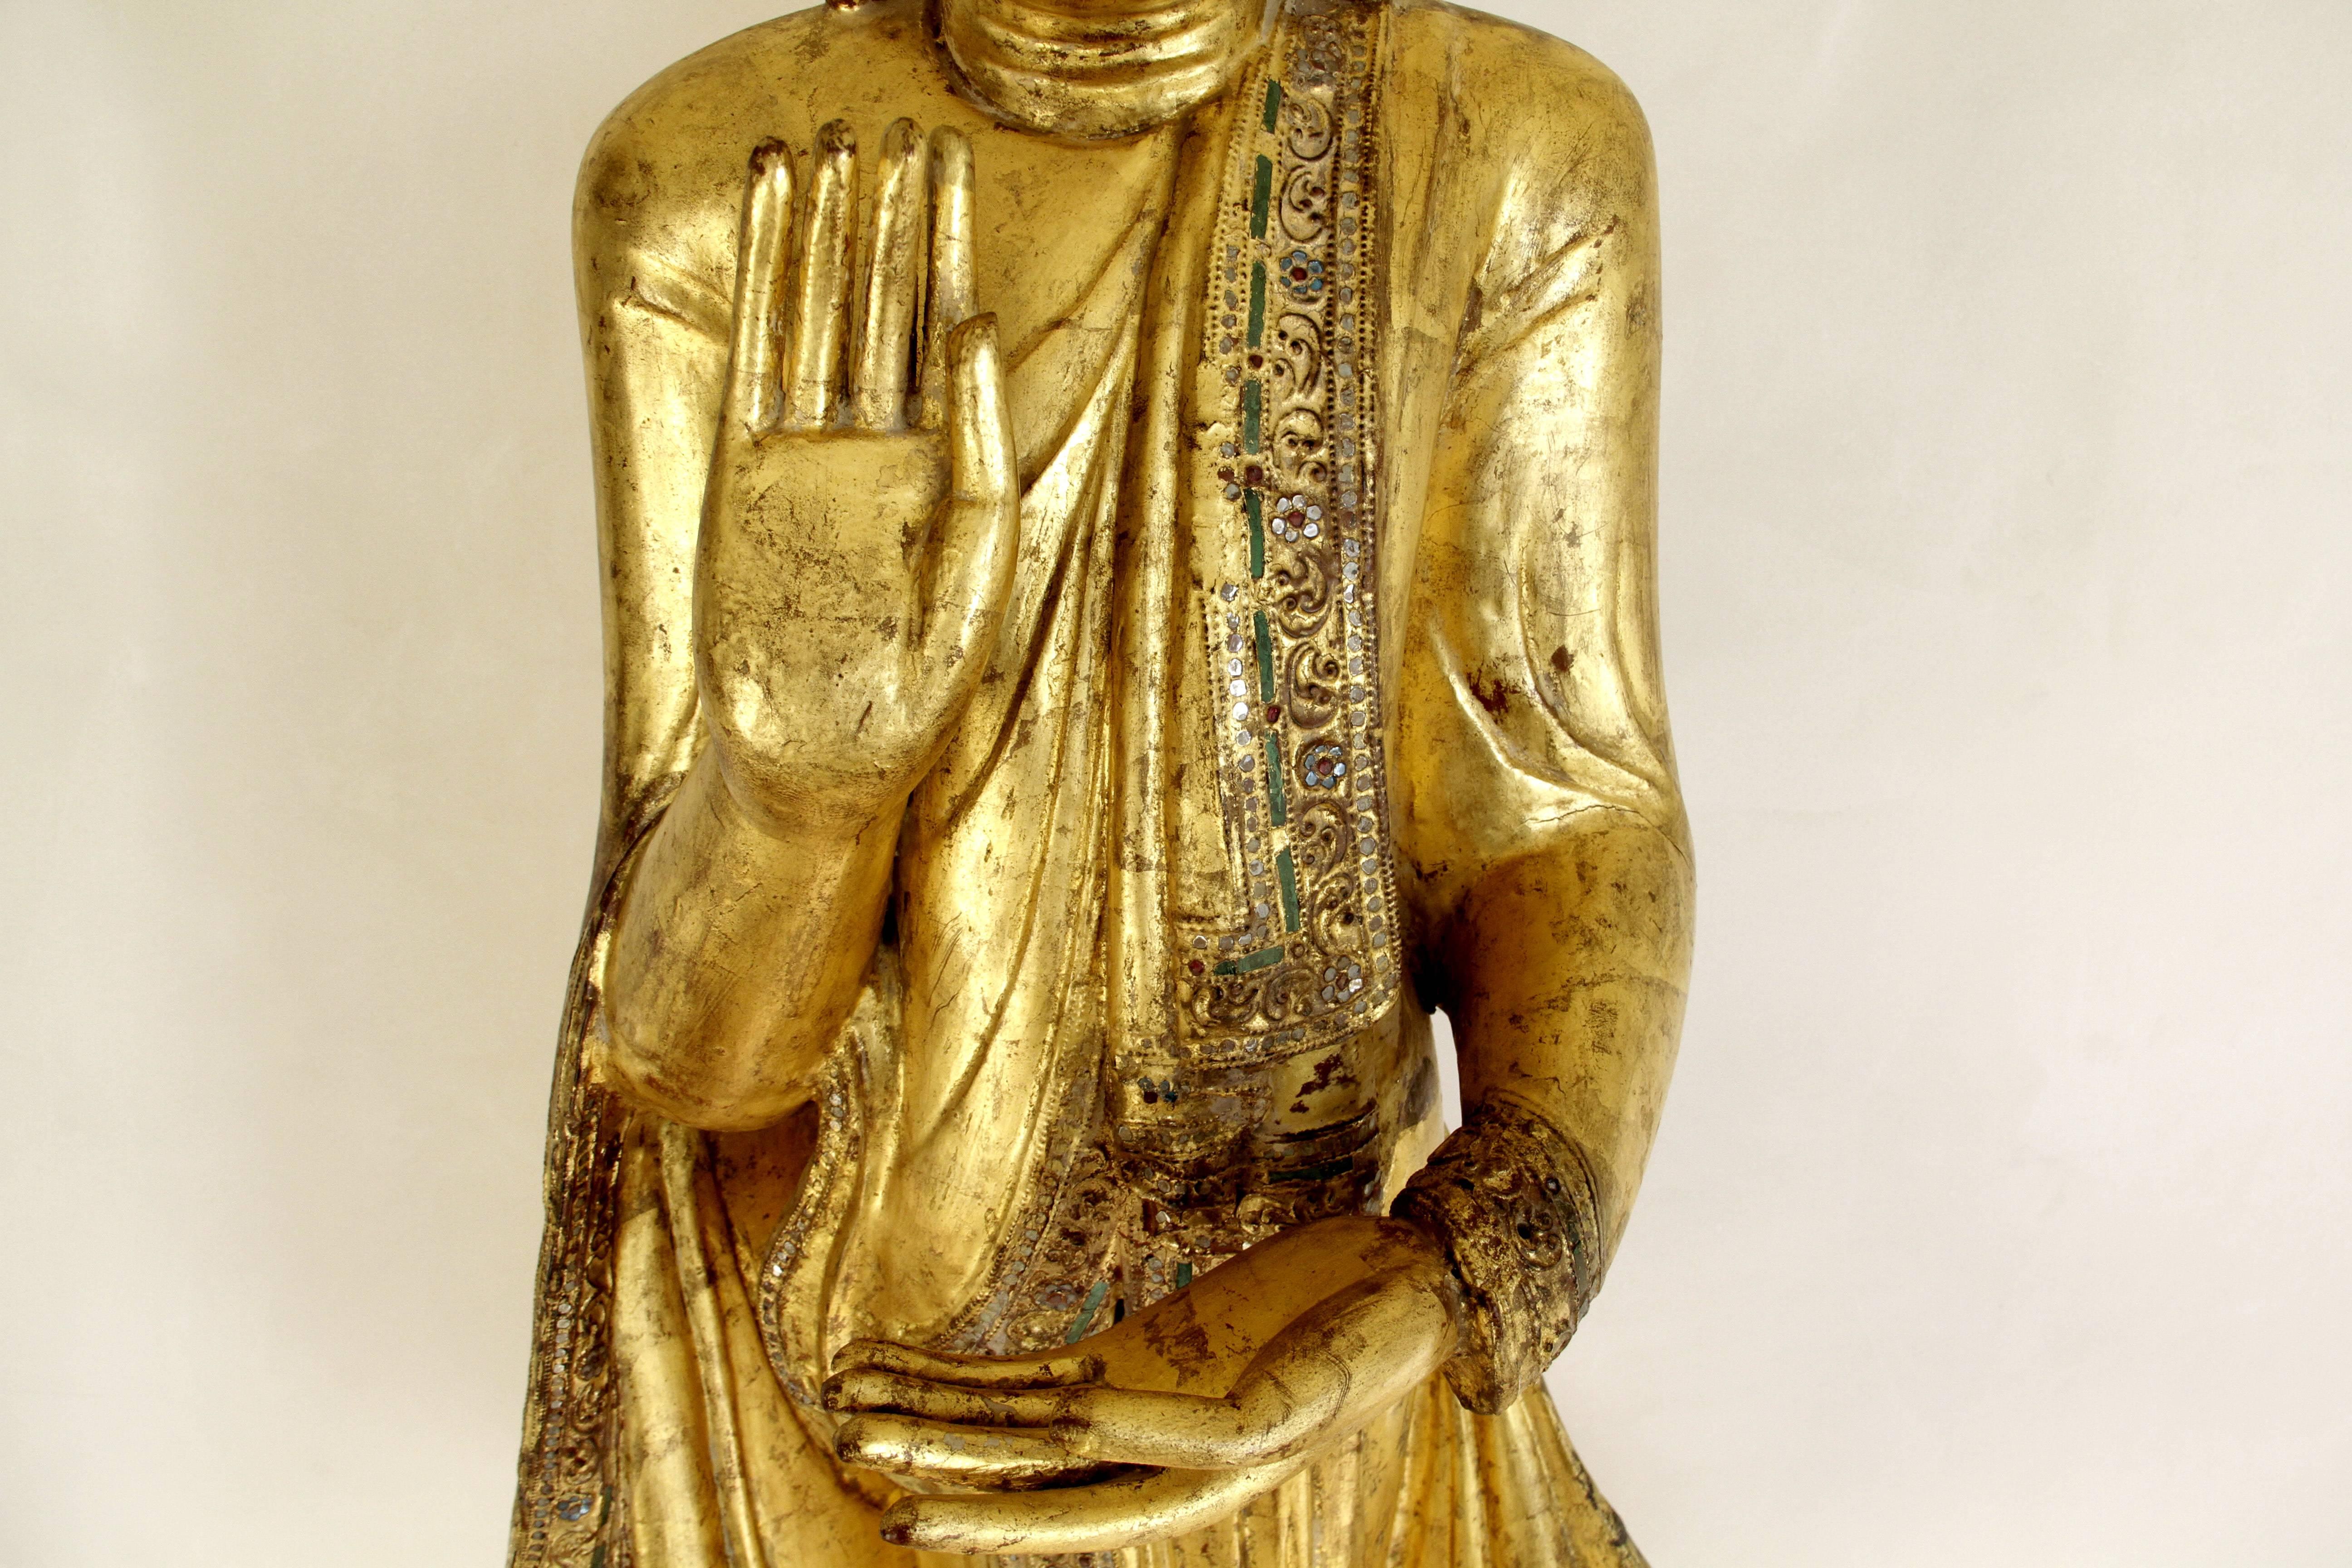 This wooden standing Buddha is covered in gold. He is from Burma in the late 19th Century from the Mandalay period. He comes with a certificate of description and evaluation. He stands 64 inches tall and is in excellent condition. He stands on a